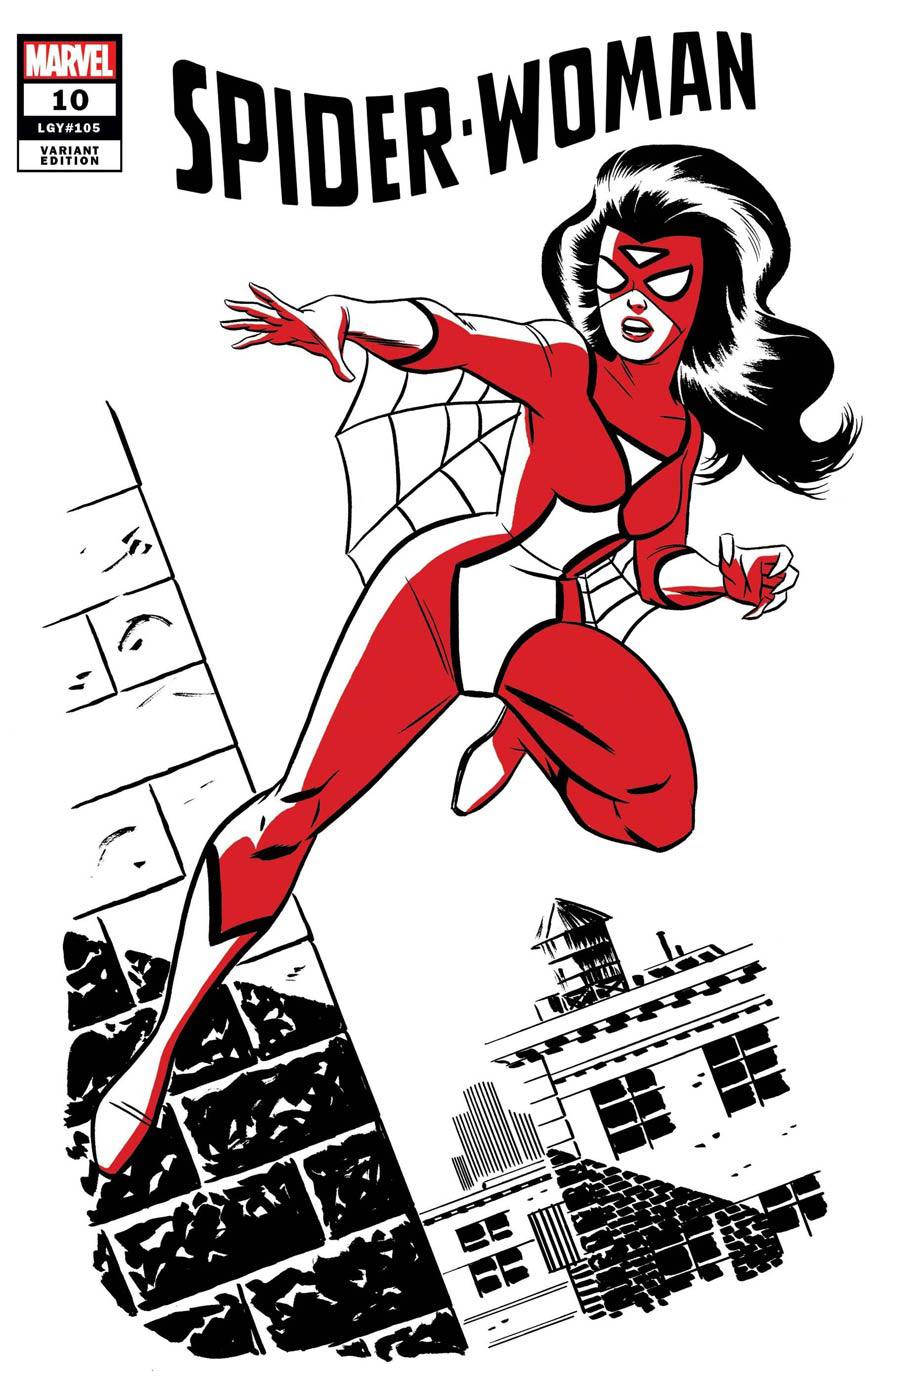 Spider-Woman Vol 7 #10 Cover C Variant Michael Cho Spider-Woman Two-Tone Cover